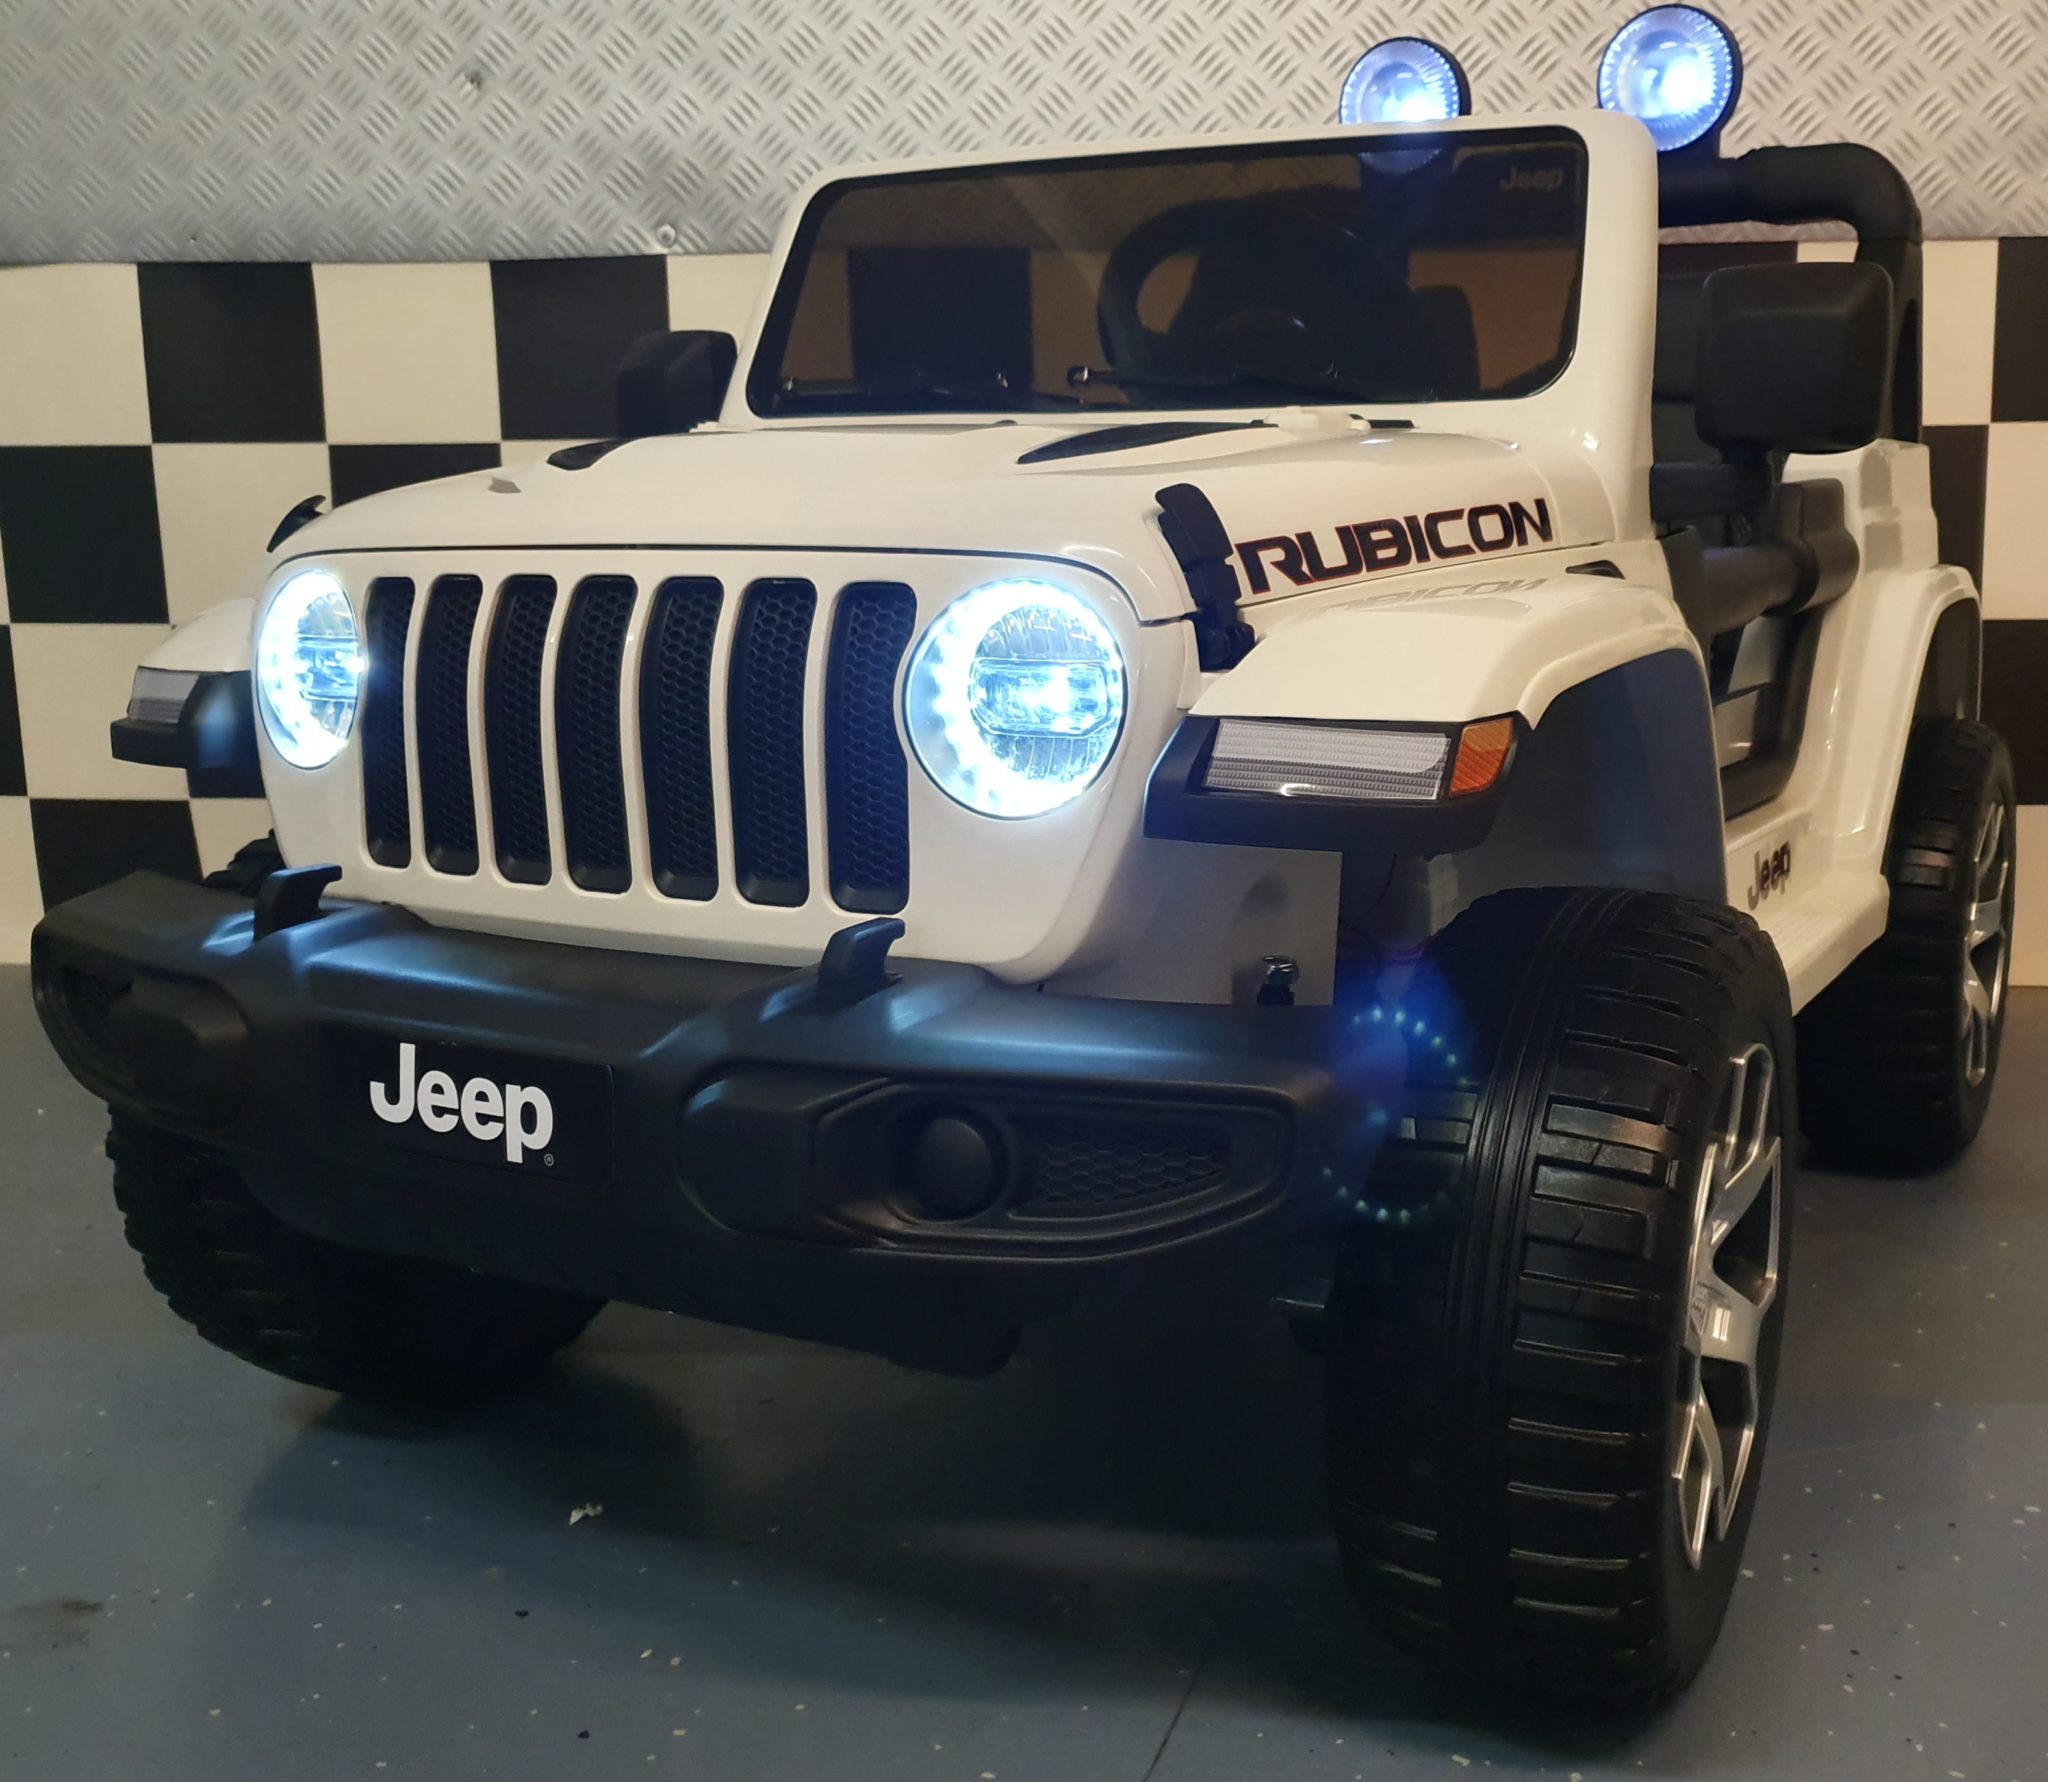 JEEP WRANGLER 1 PERSOONS 4WD | WIT | 12V | 2.4G - Kids-Accu Cars